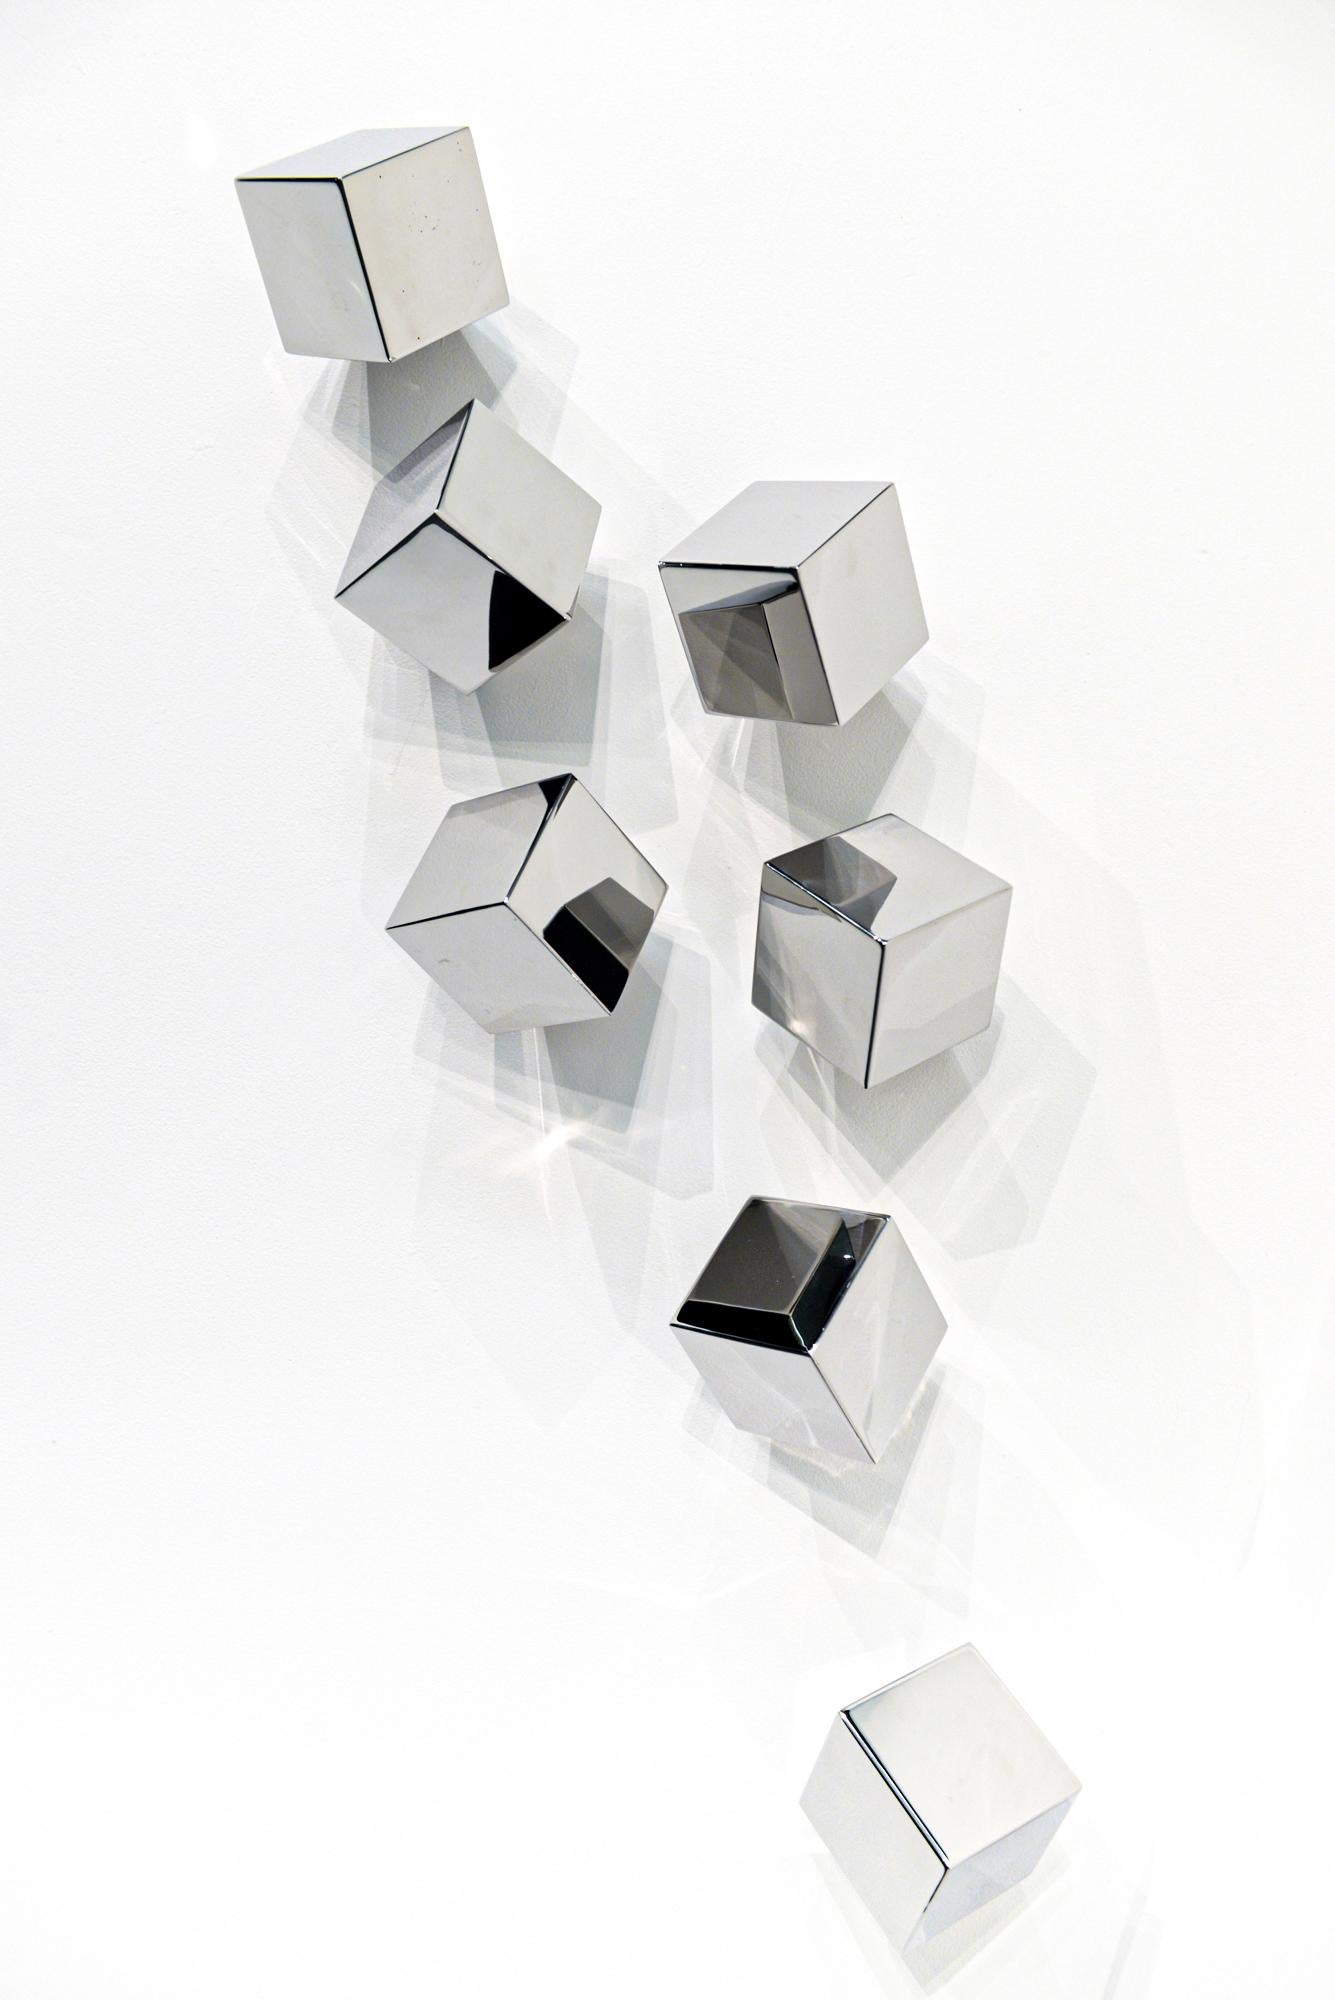 Change - multiple, polished stainless steel, cubes, abstract, wall sculpture - Contemporary Sculpture by  Lori Cozen-Geller